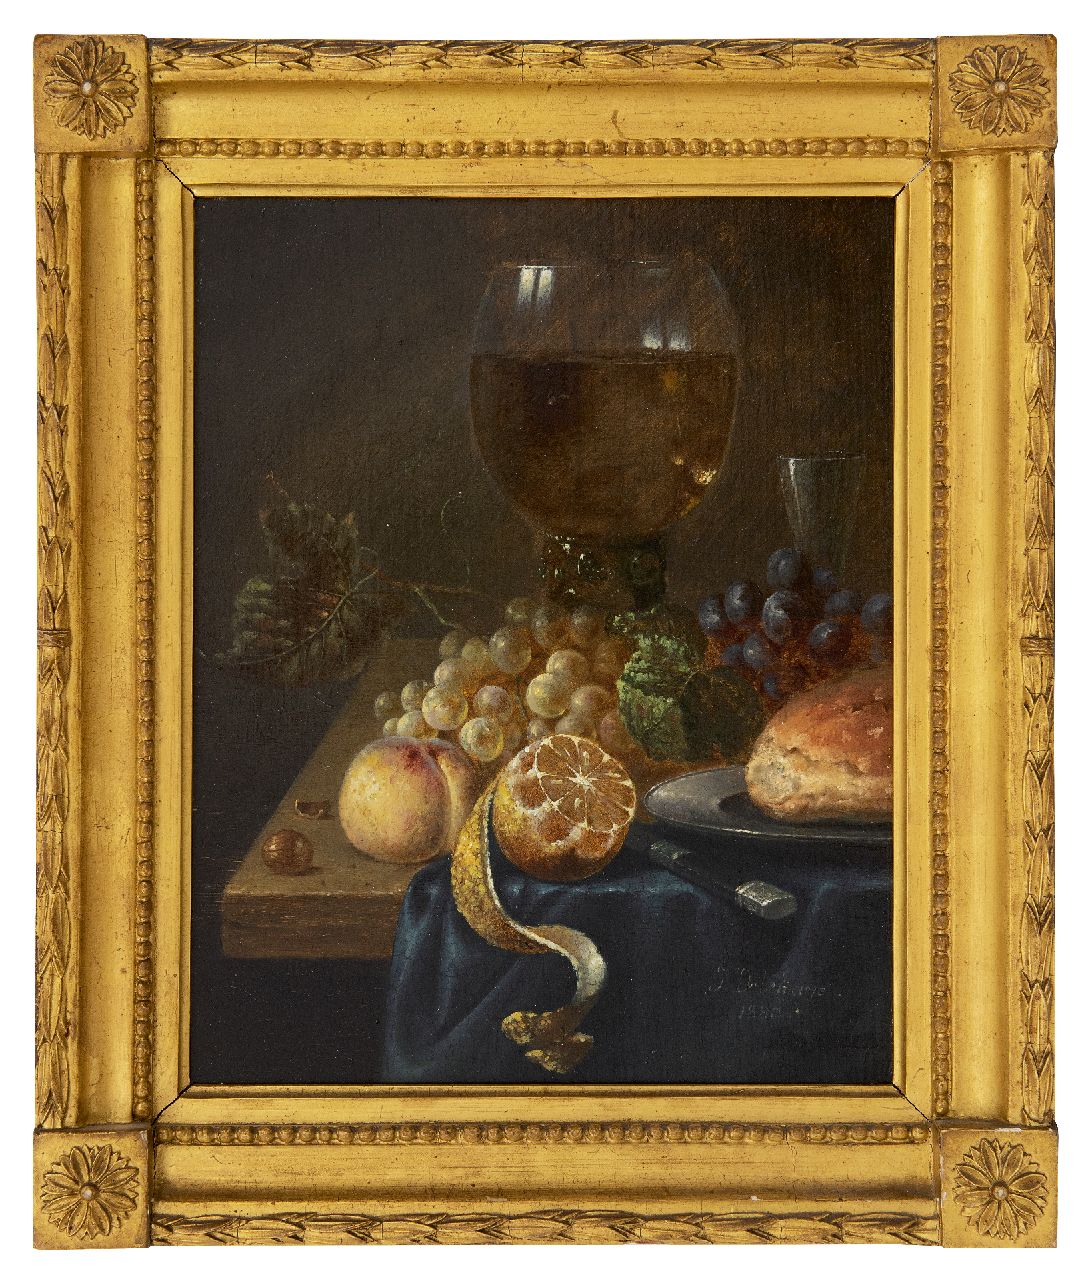 Delehaye J.  | Jos Delehaye | Paintings offered for sale | Still life with Roemer, gtrapes, lemon and pewter dish, oil on canvas 26.9 x 21.2 cm, signed l.r. and dated 1880